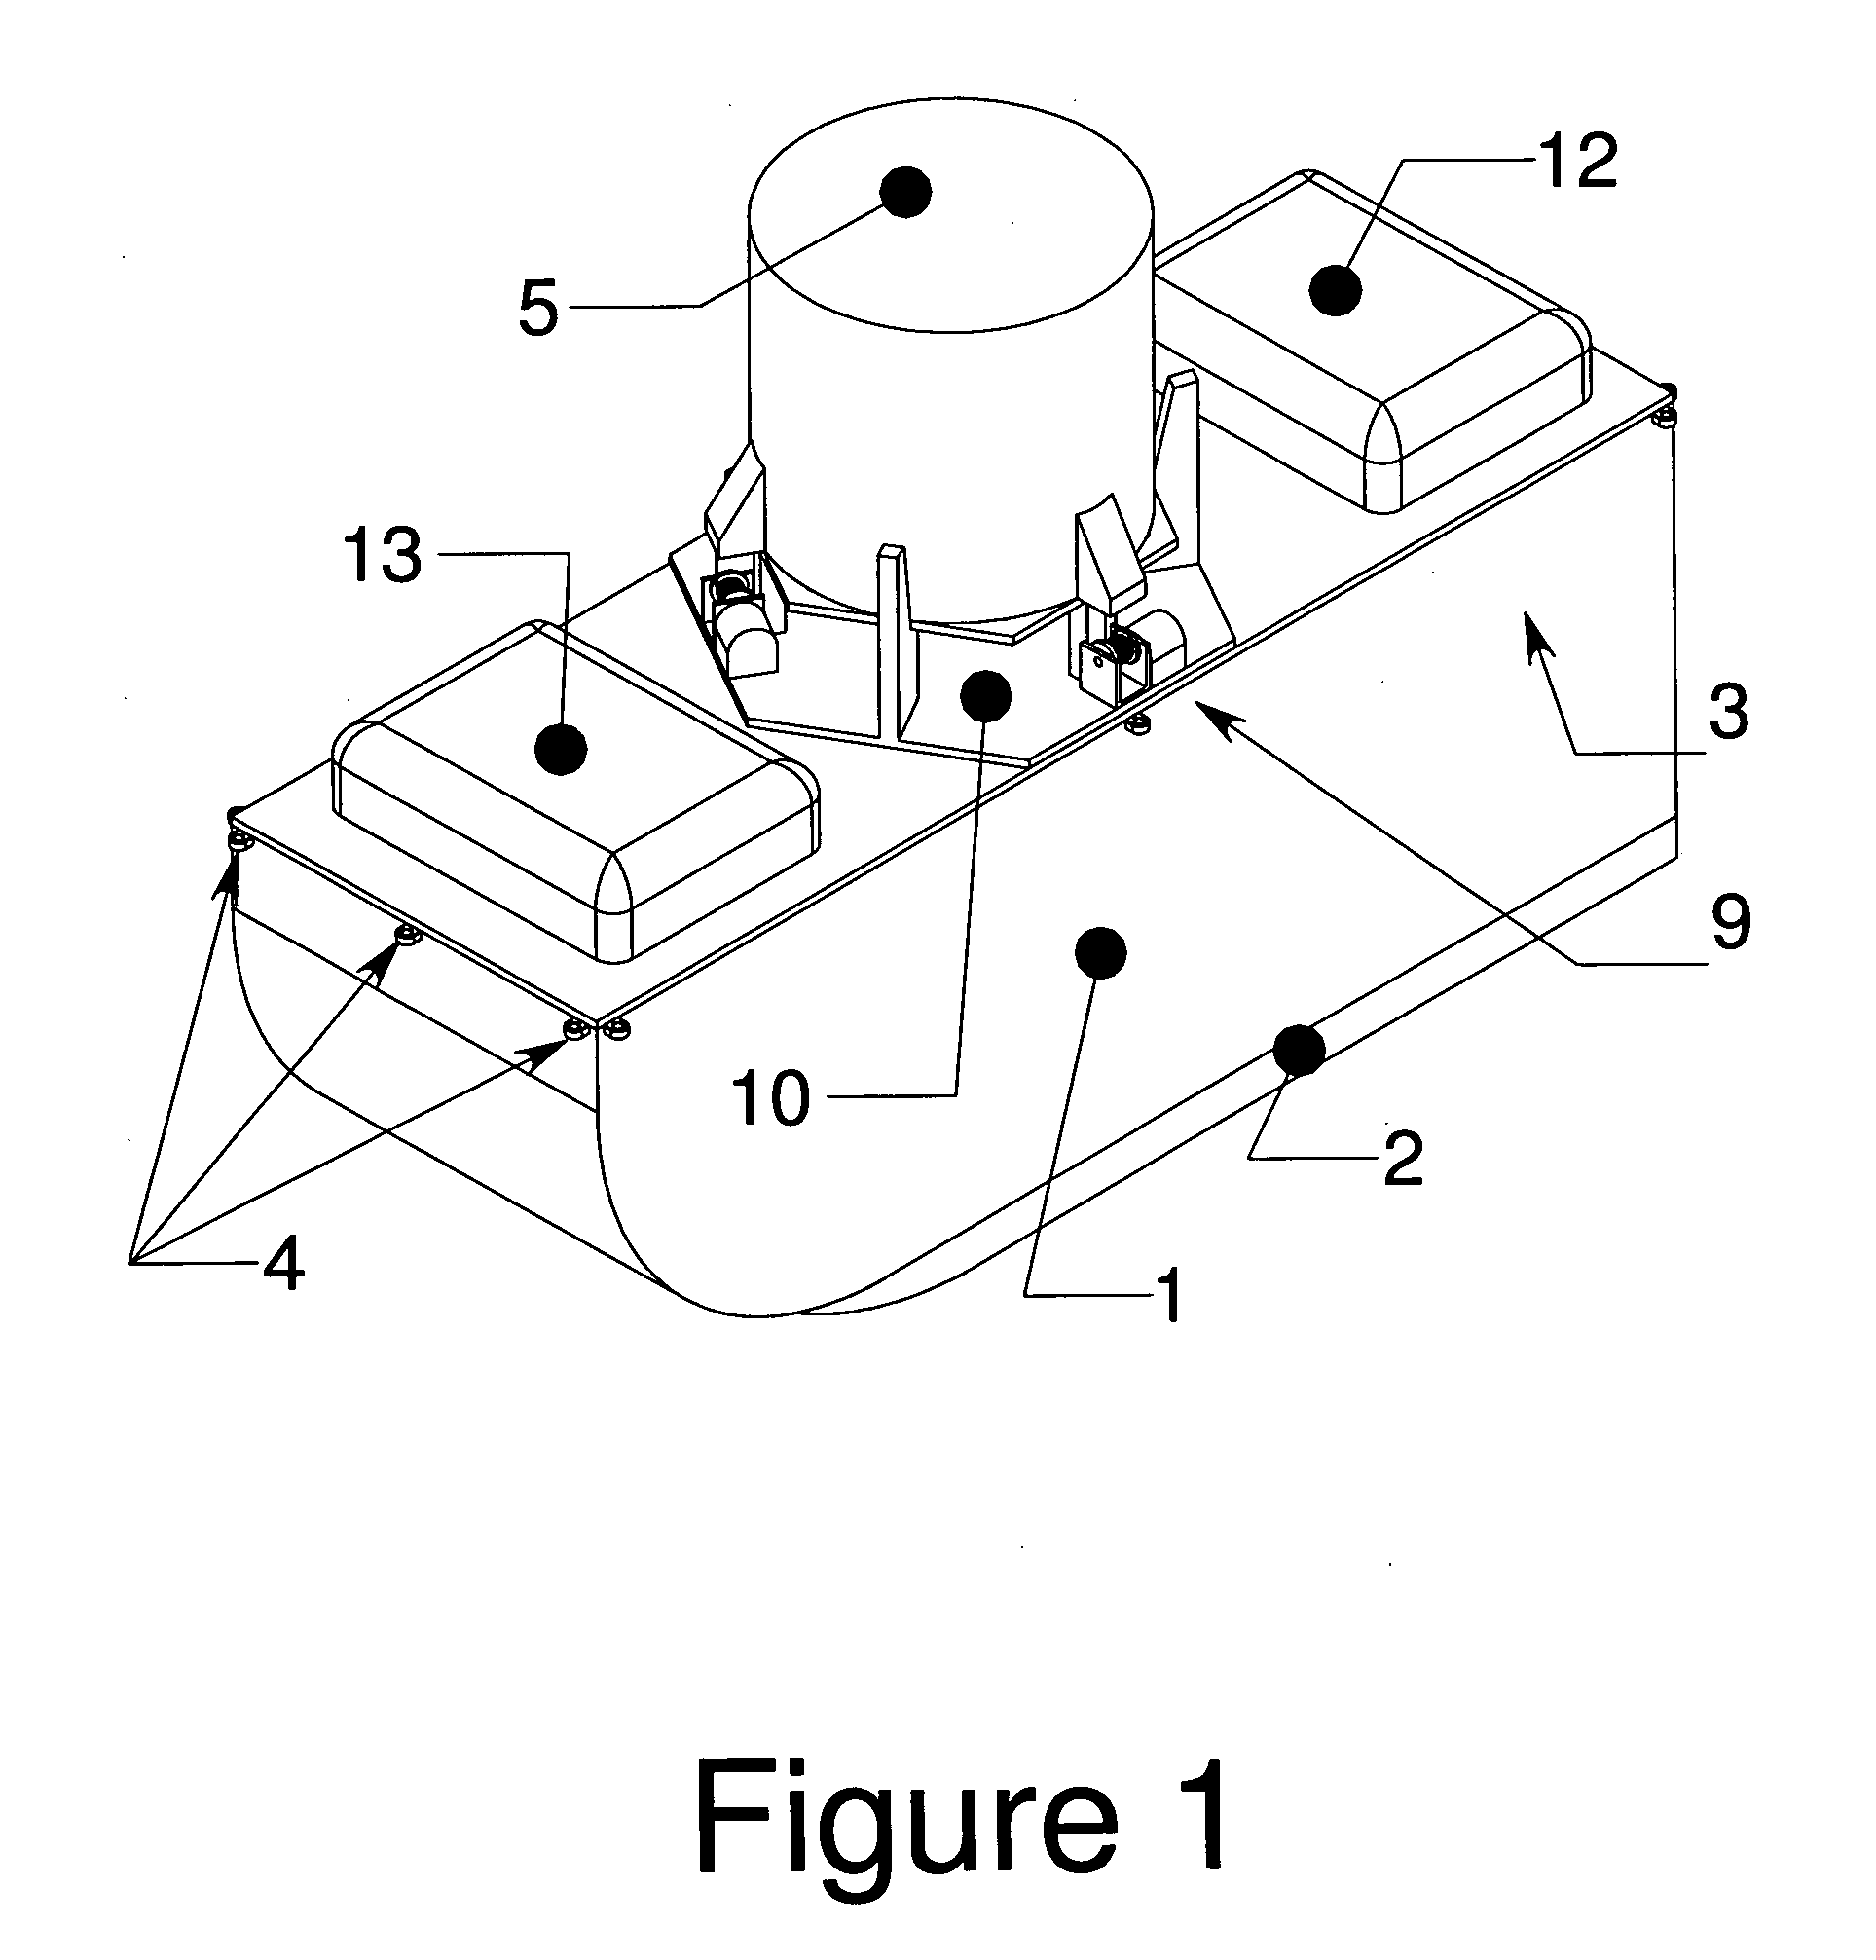 System and method for deploying and retrieving a wave energy converter